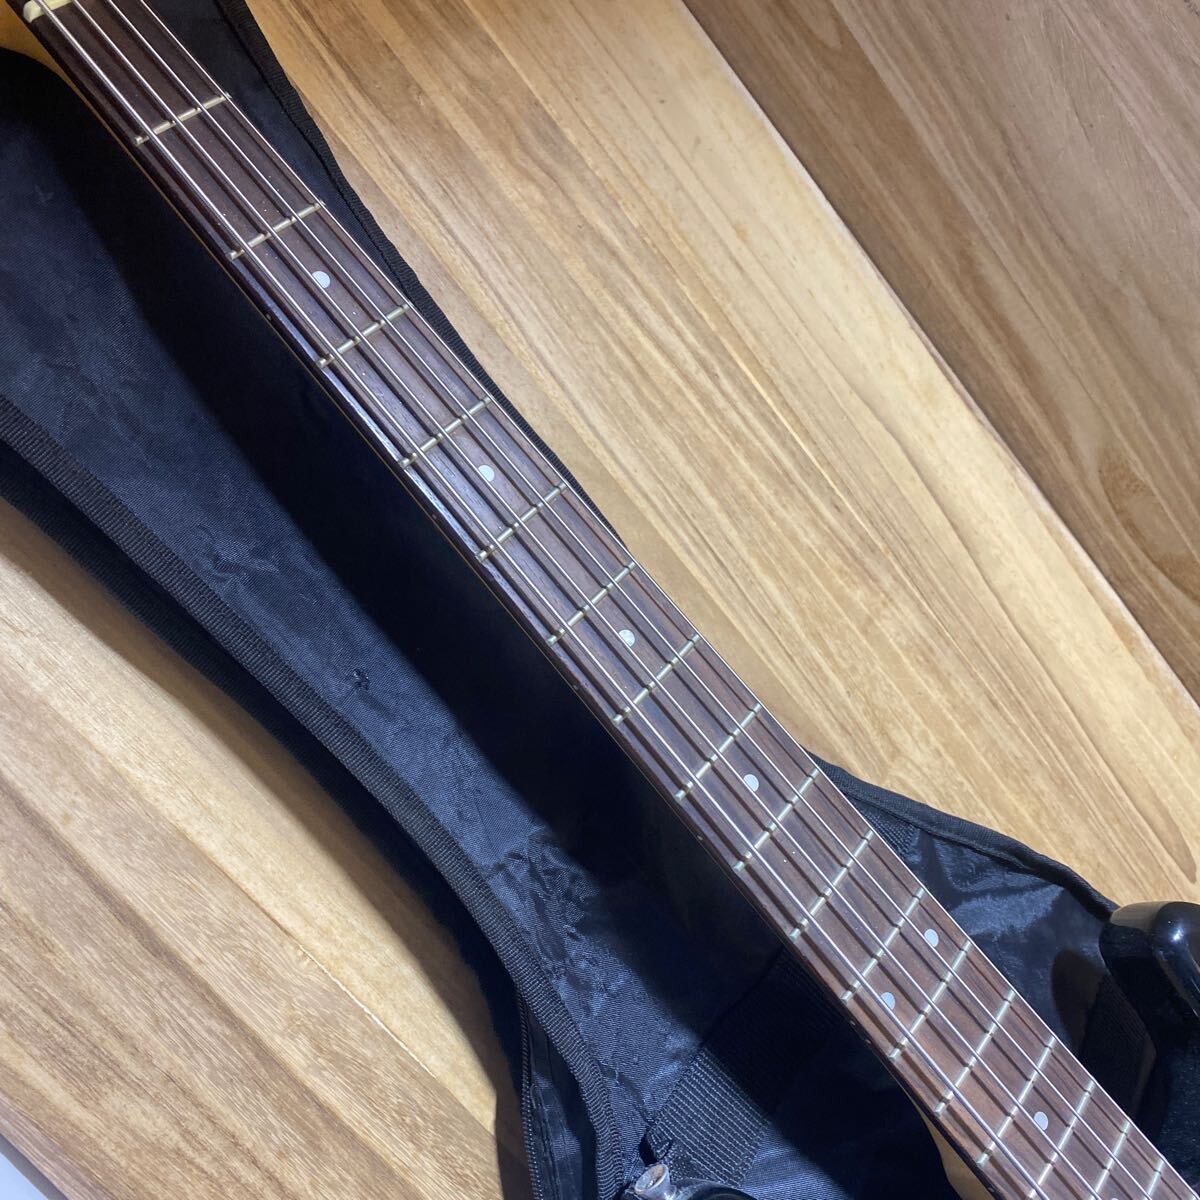 PhotoGenic electric bass black soft case attaching sound out has confirmed 